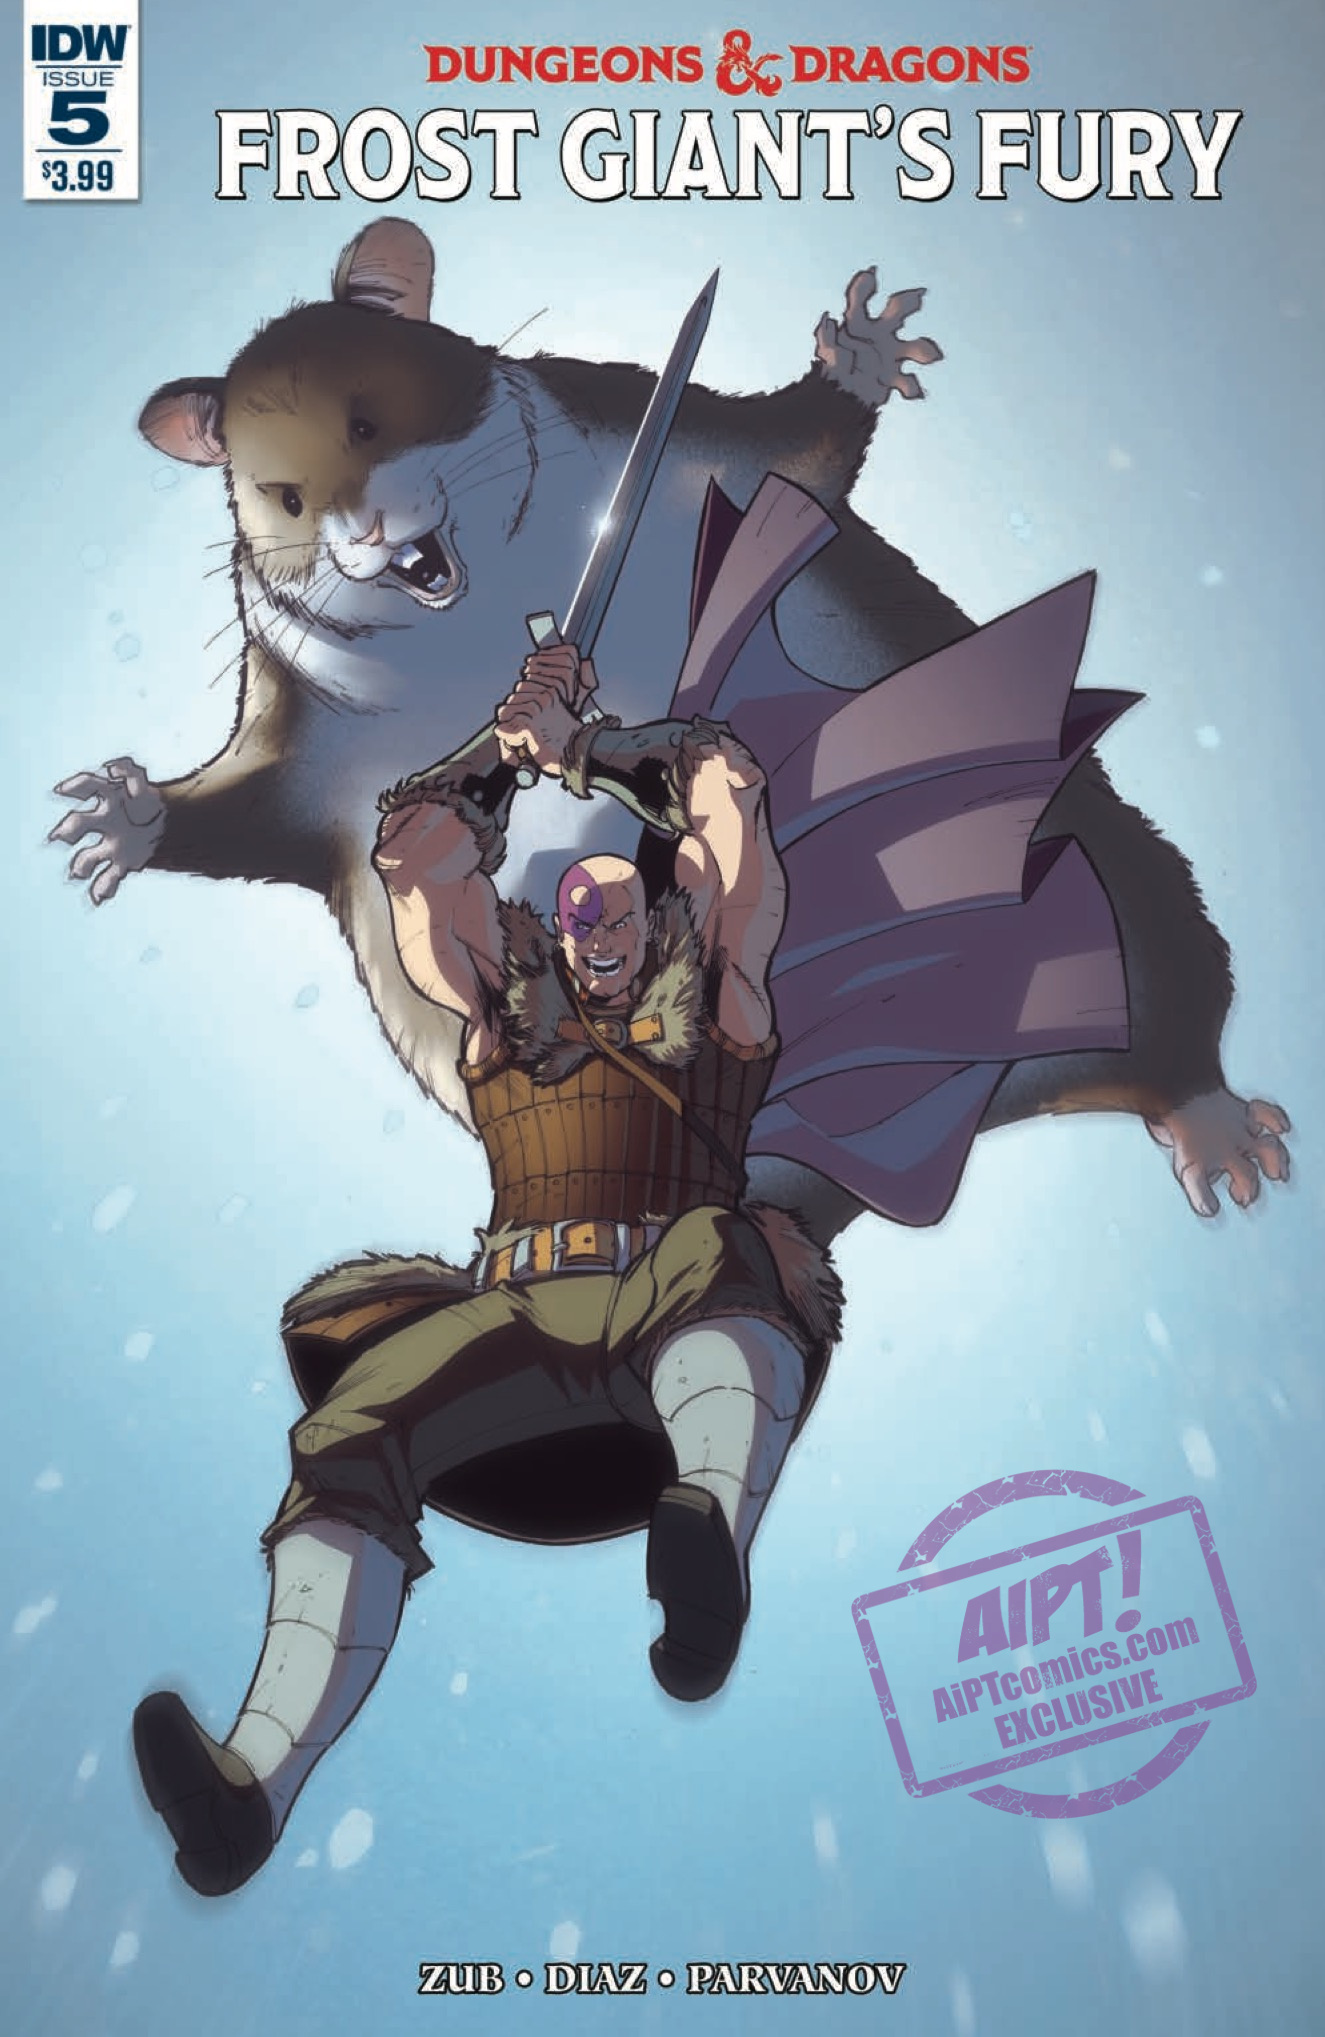 [EXCLUSIVE] IDW Preview: Dungeons & Dragons: Frost Giant's Fury #5